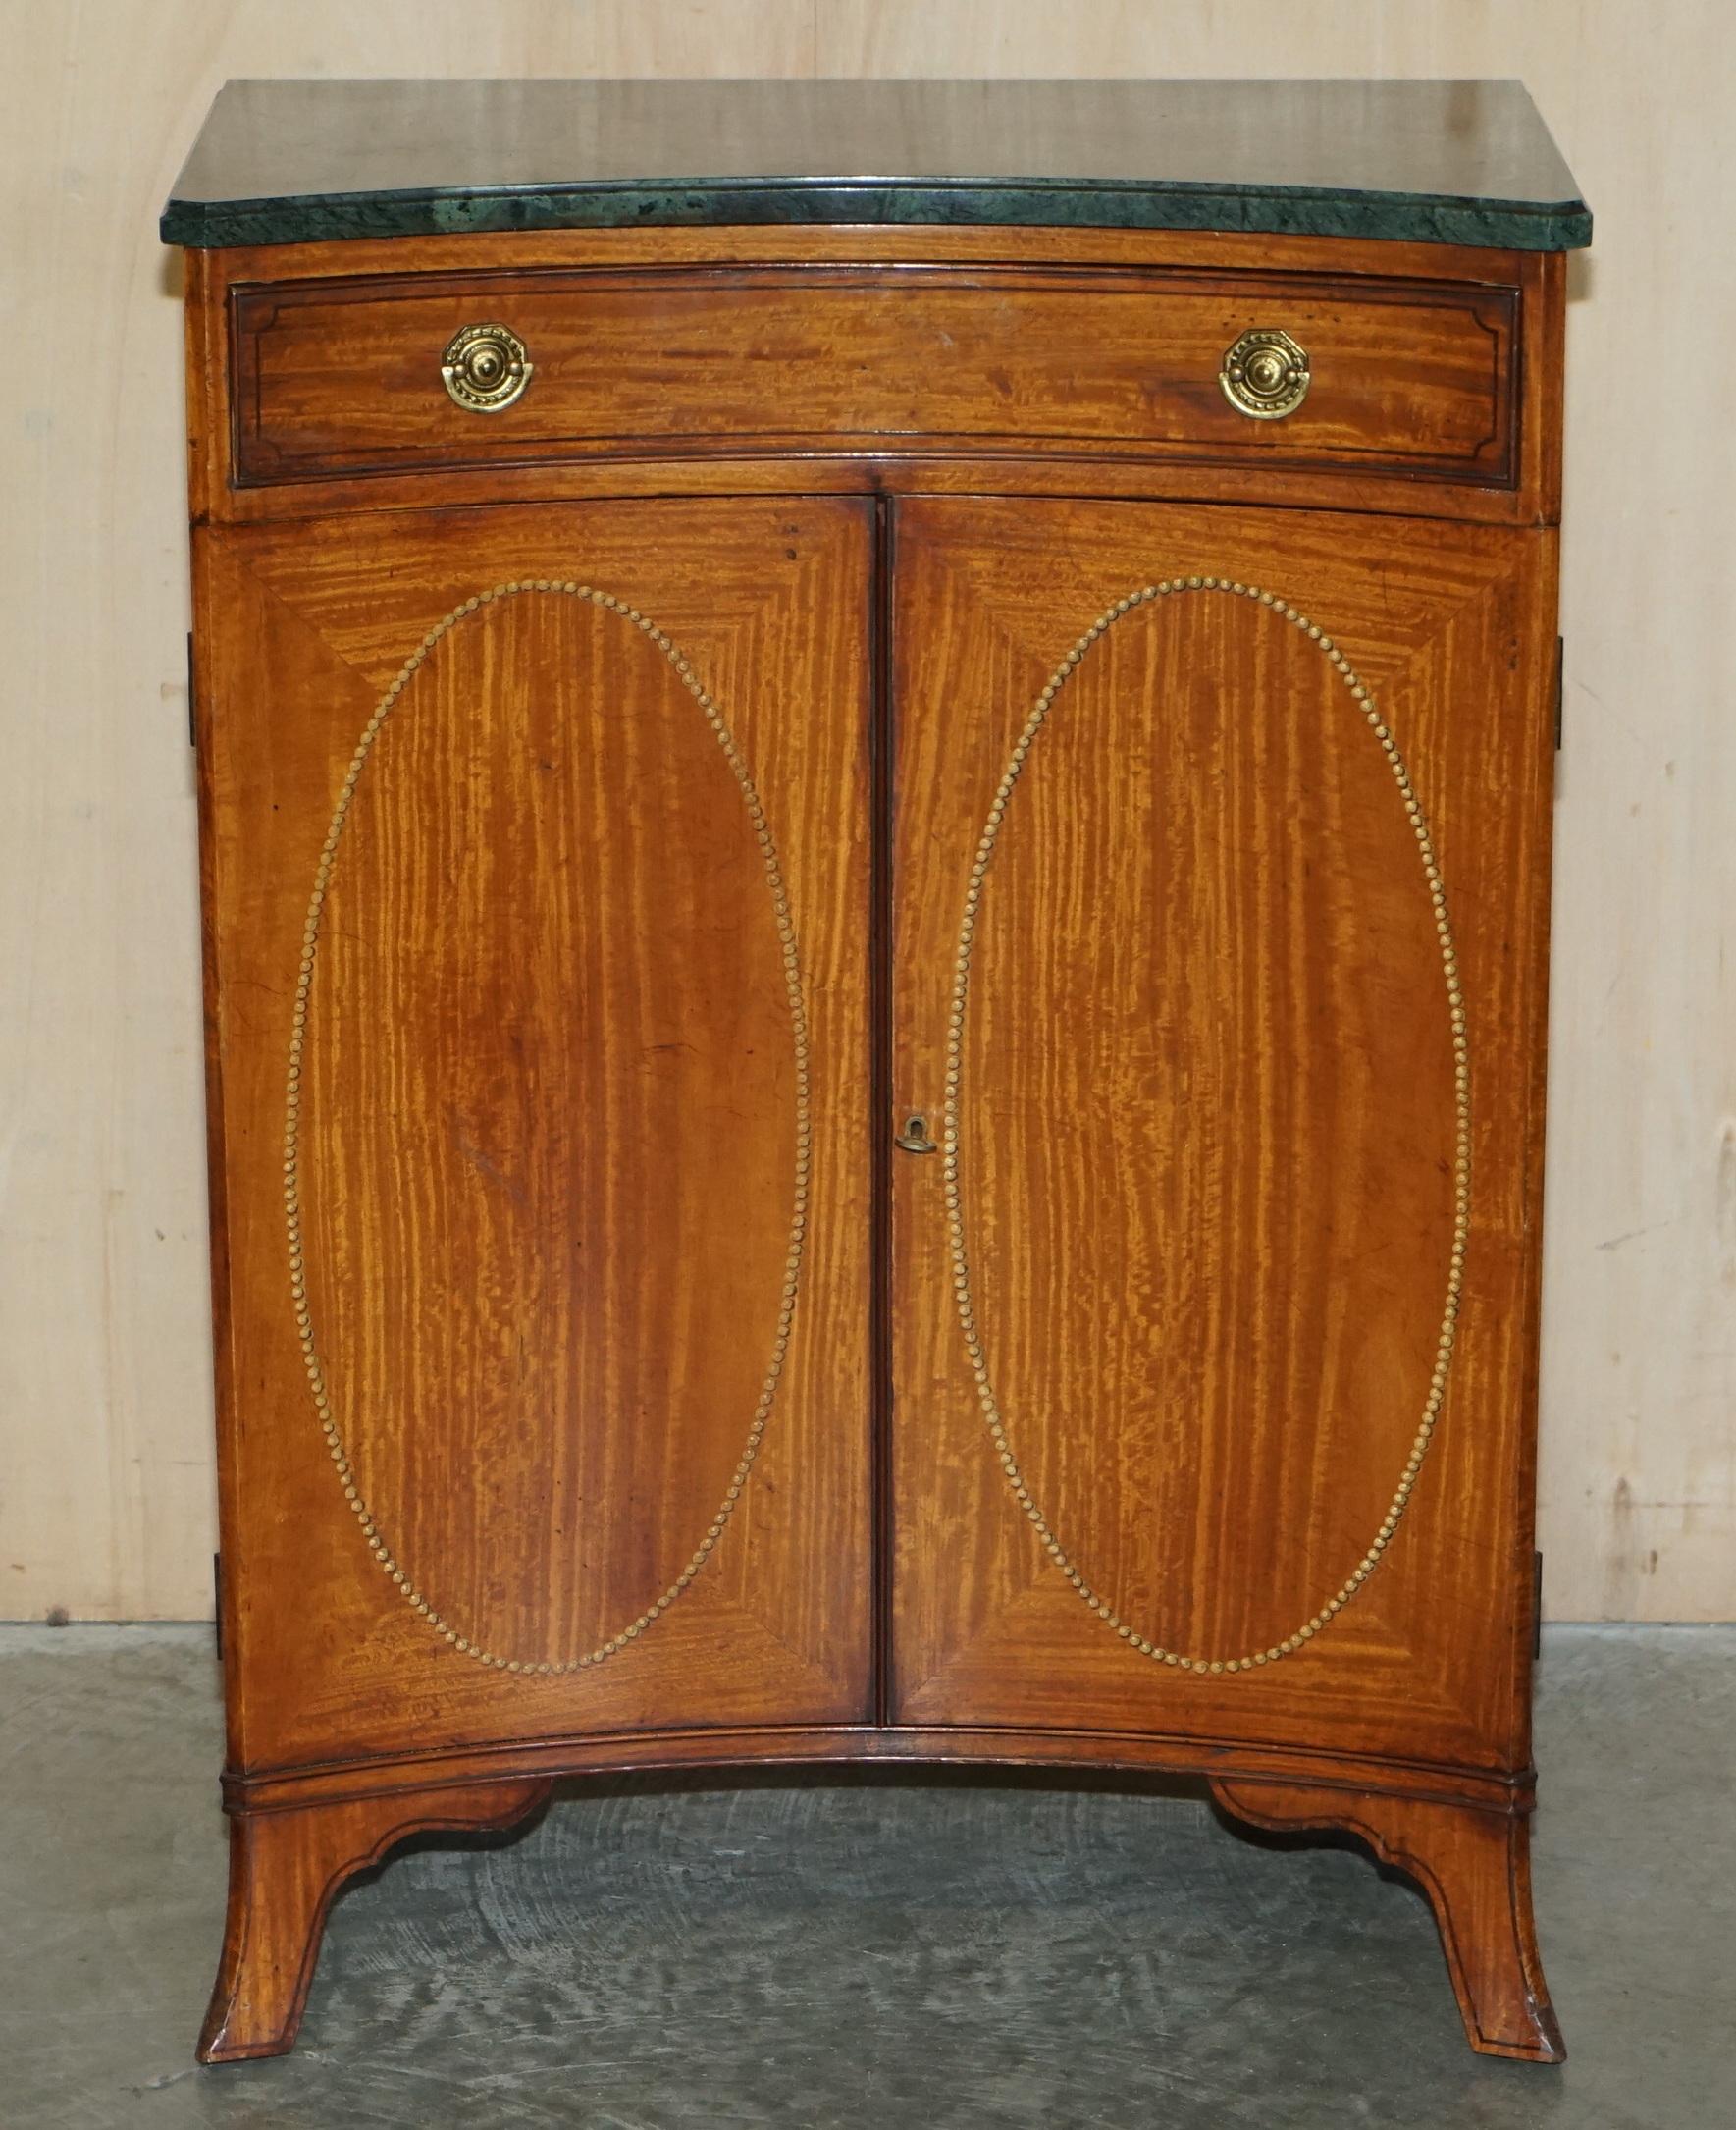 British Editors Choice Pair of Antique Sheraton Revival Marble Topped Concave Sideboards For Sale